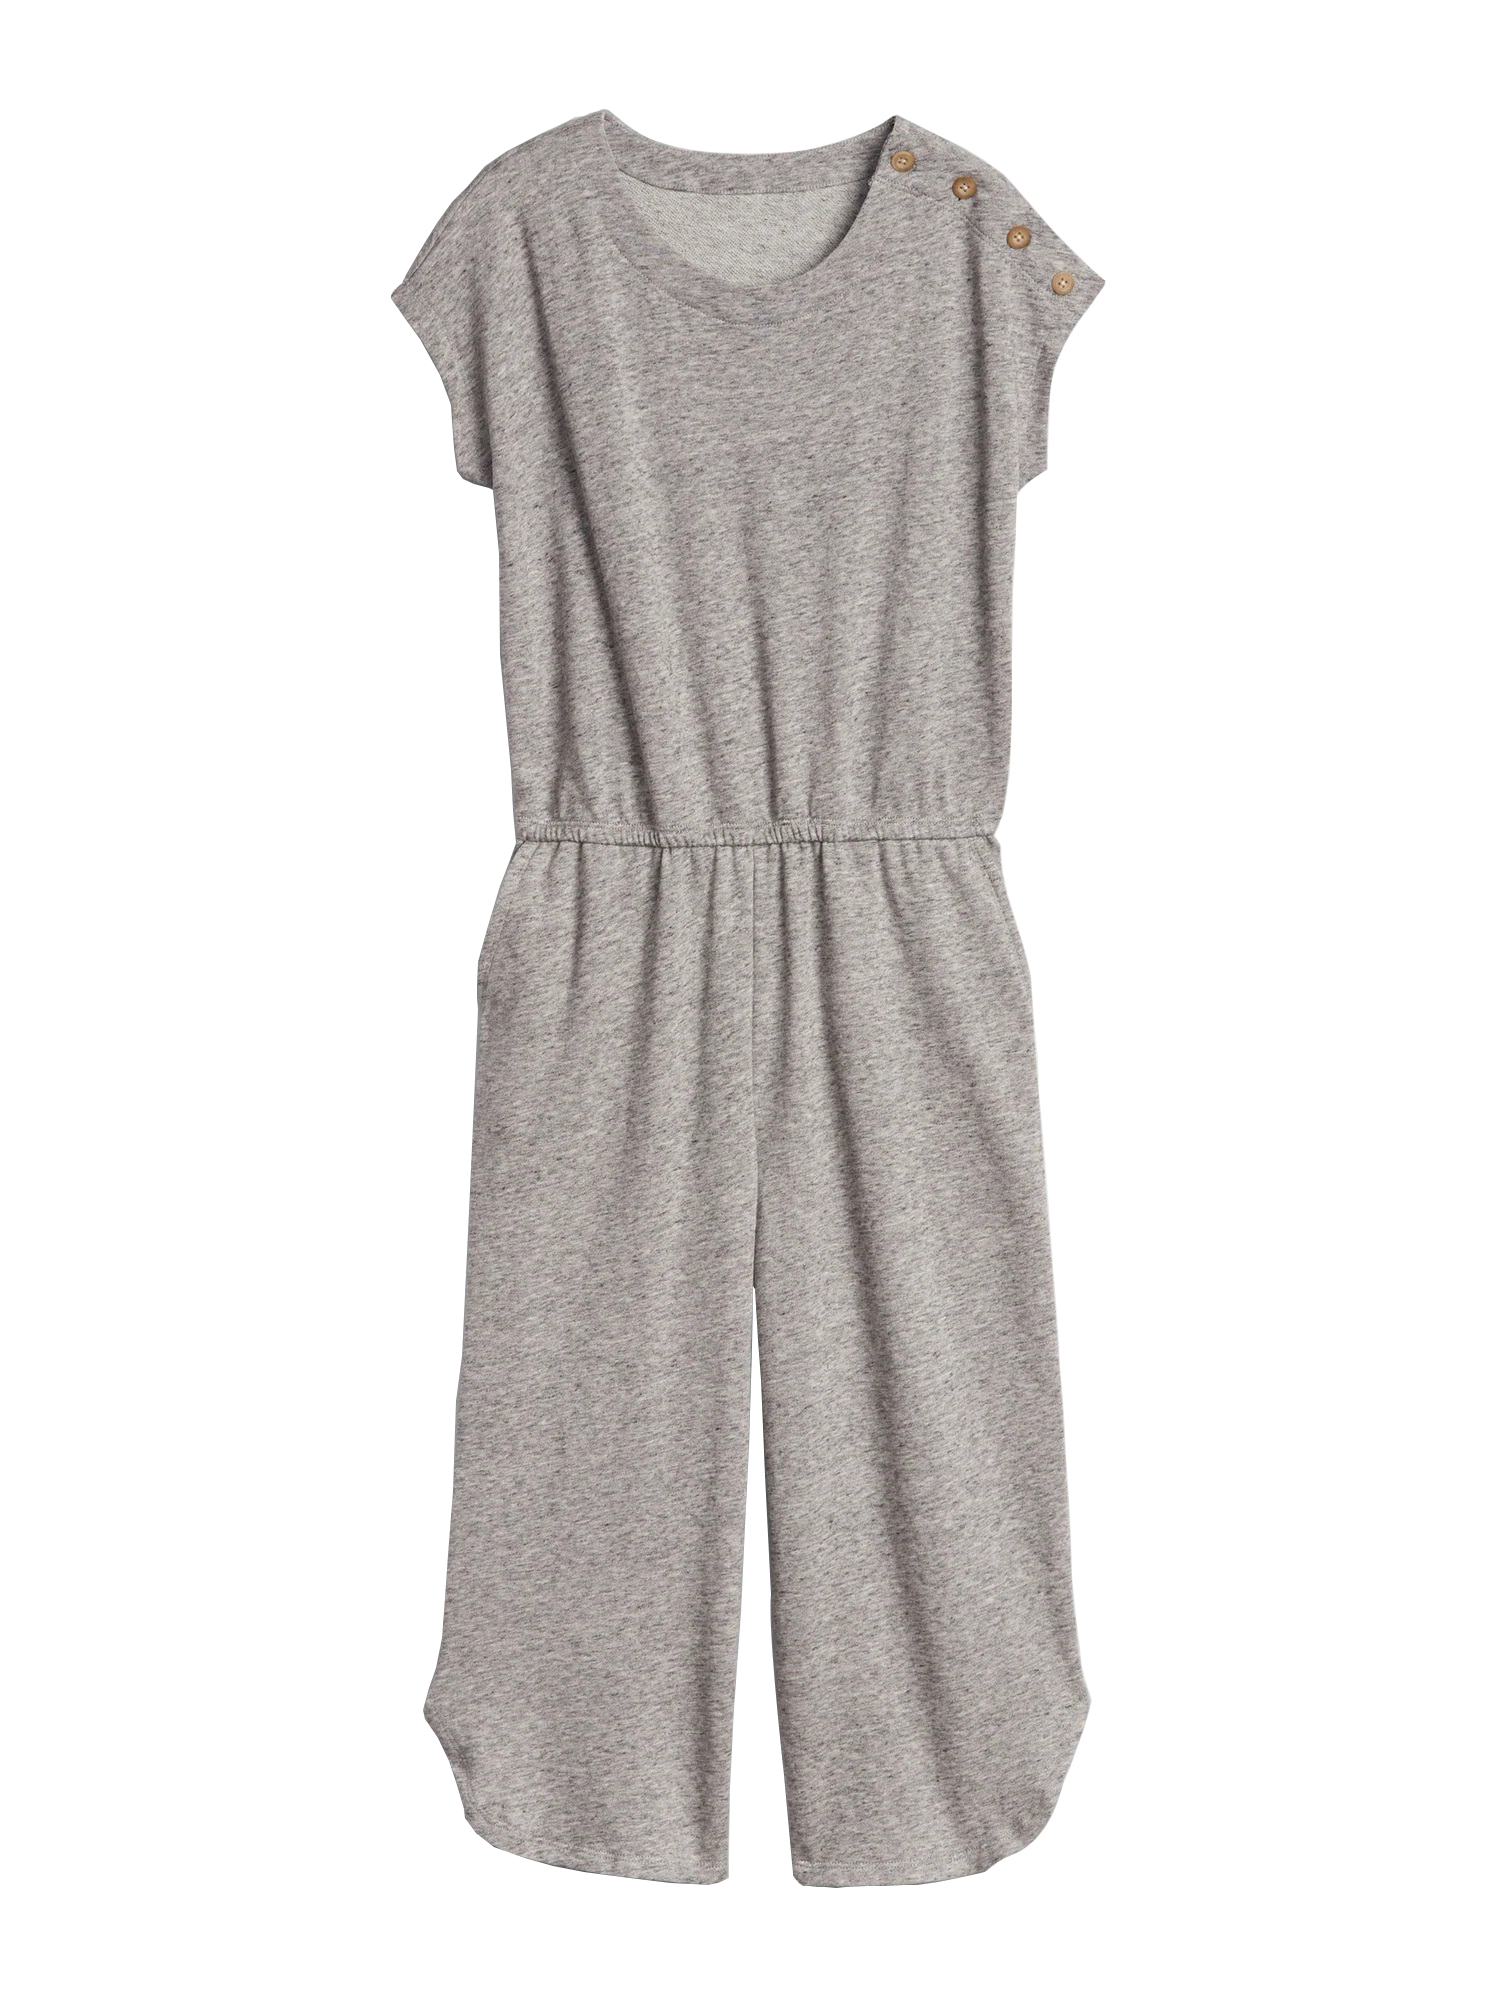 Girls Knitted Jump Suit